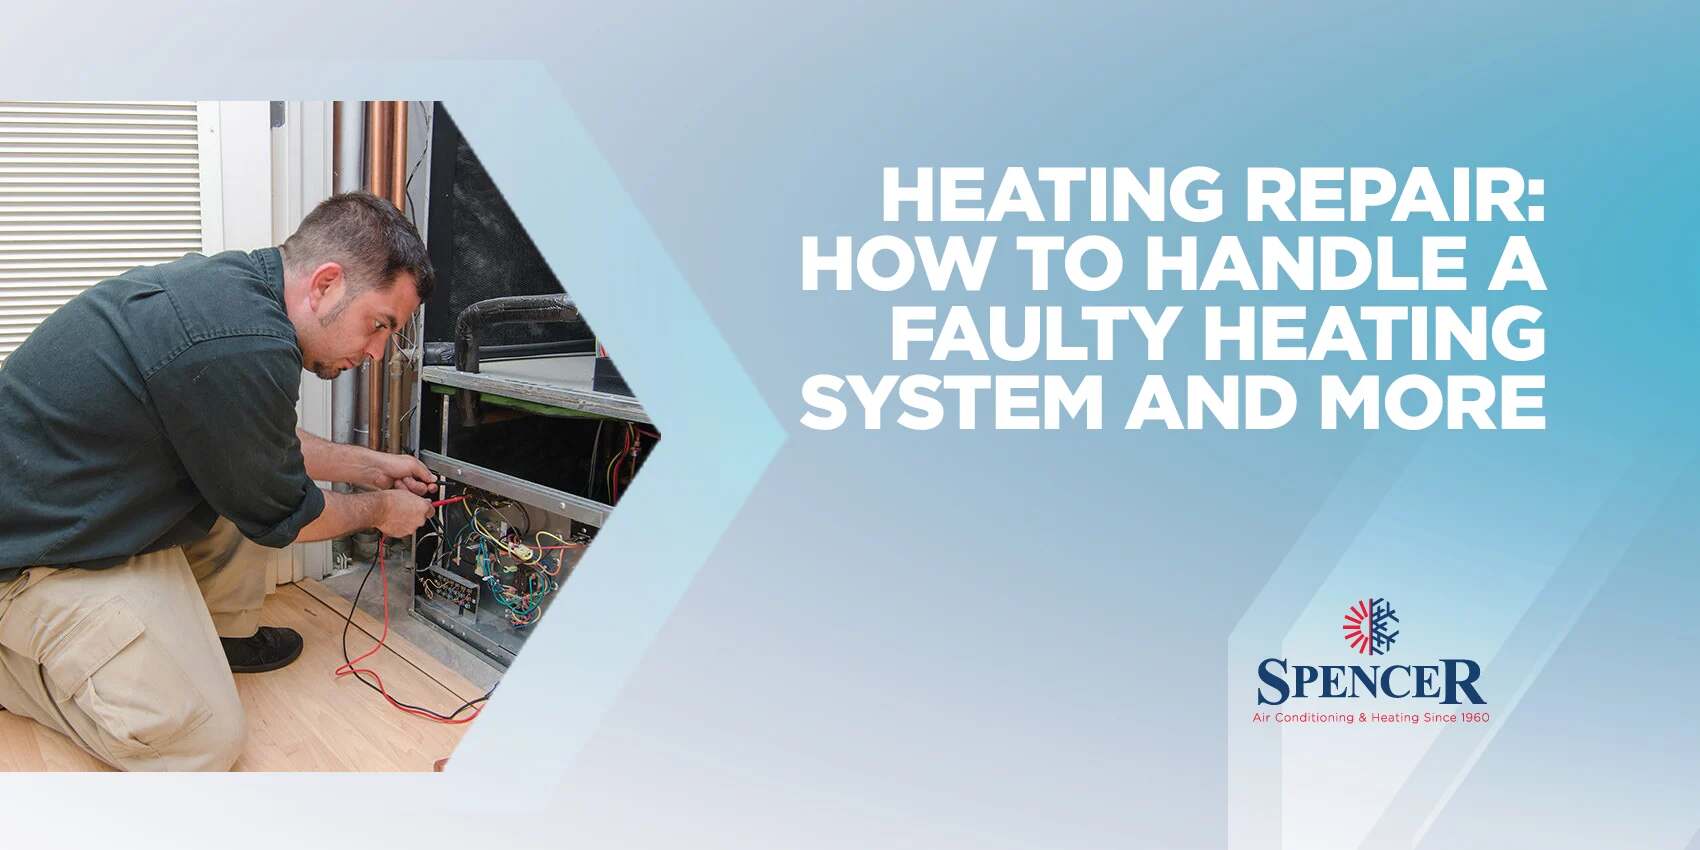 Heating Repair: How to Handle a Faulty Heating System and More